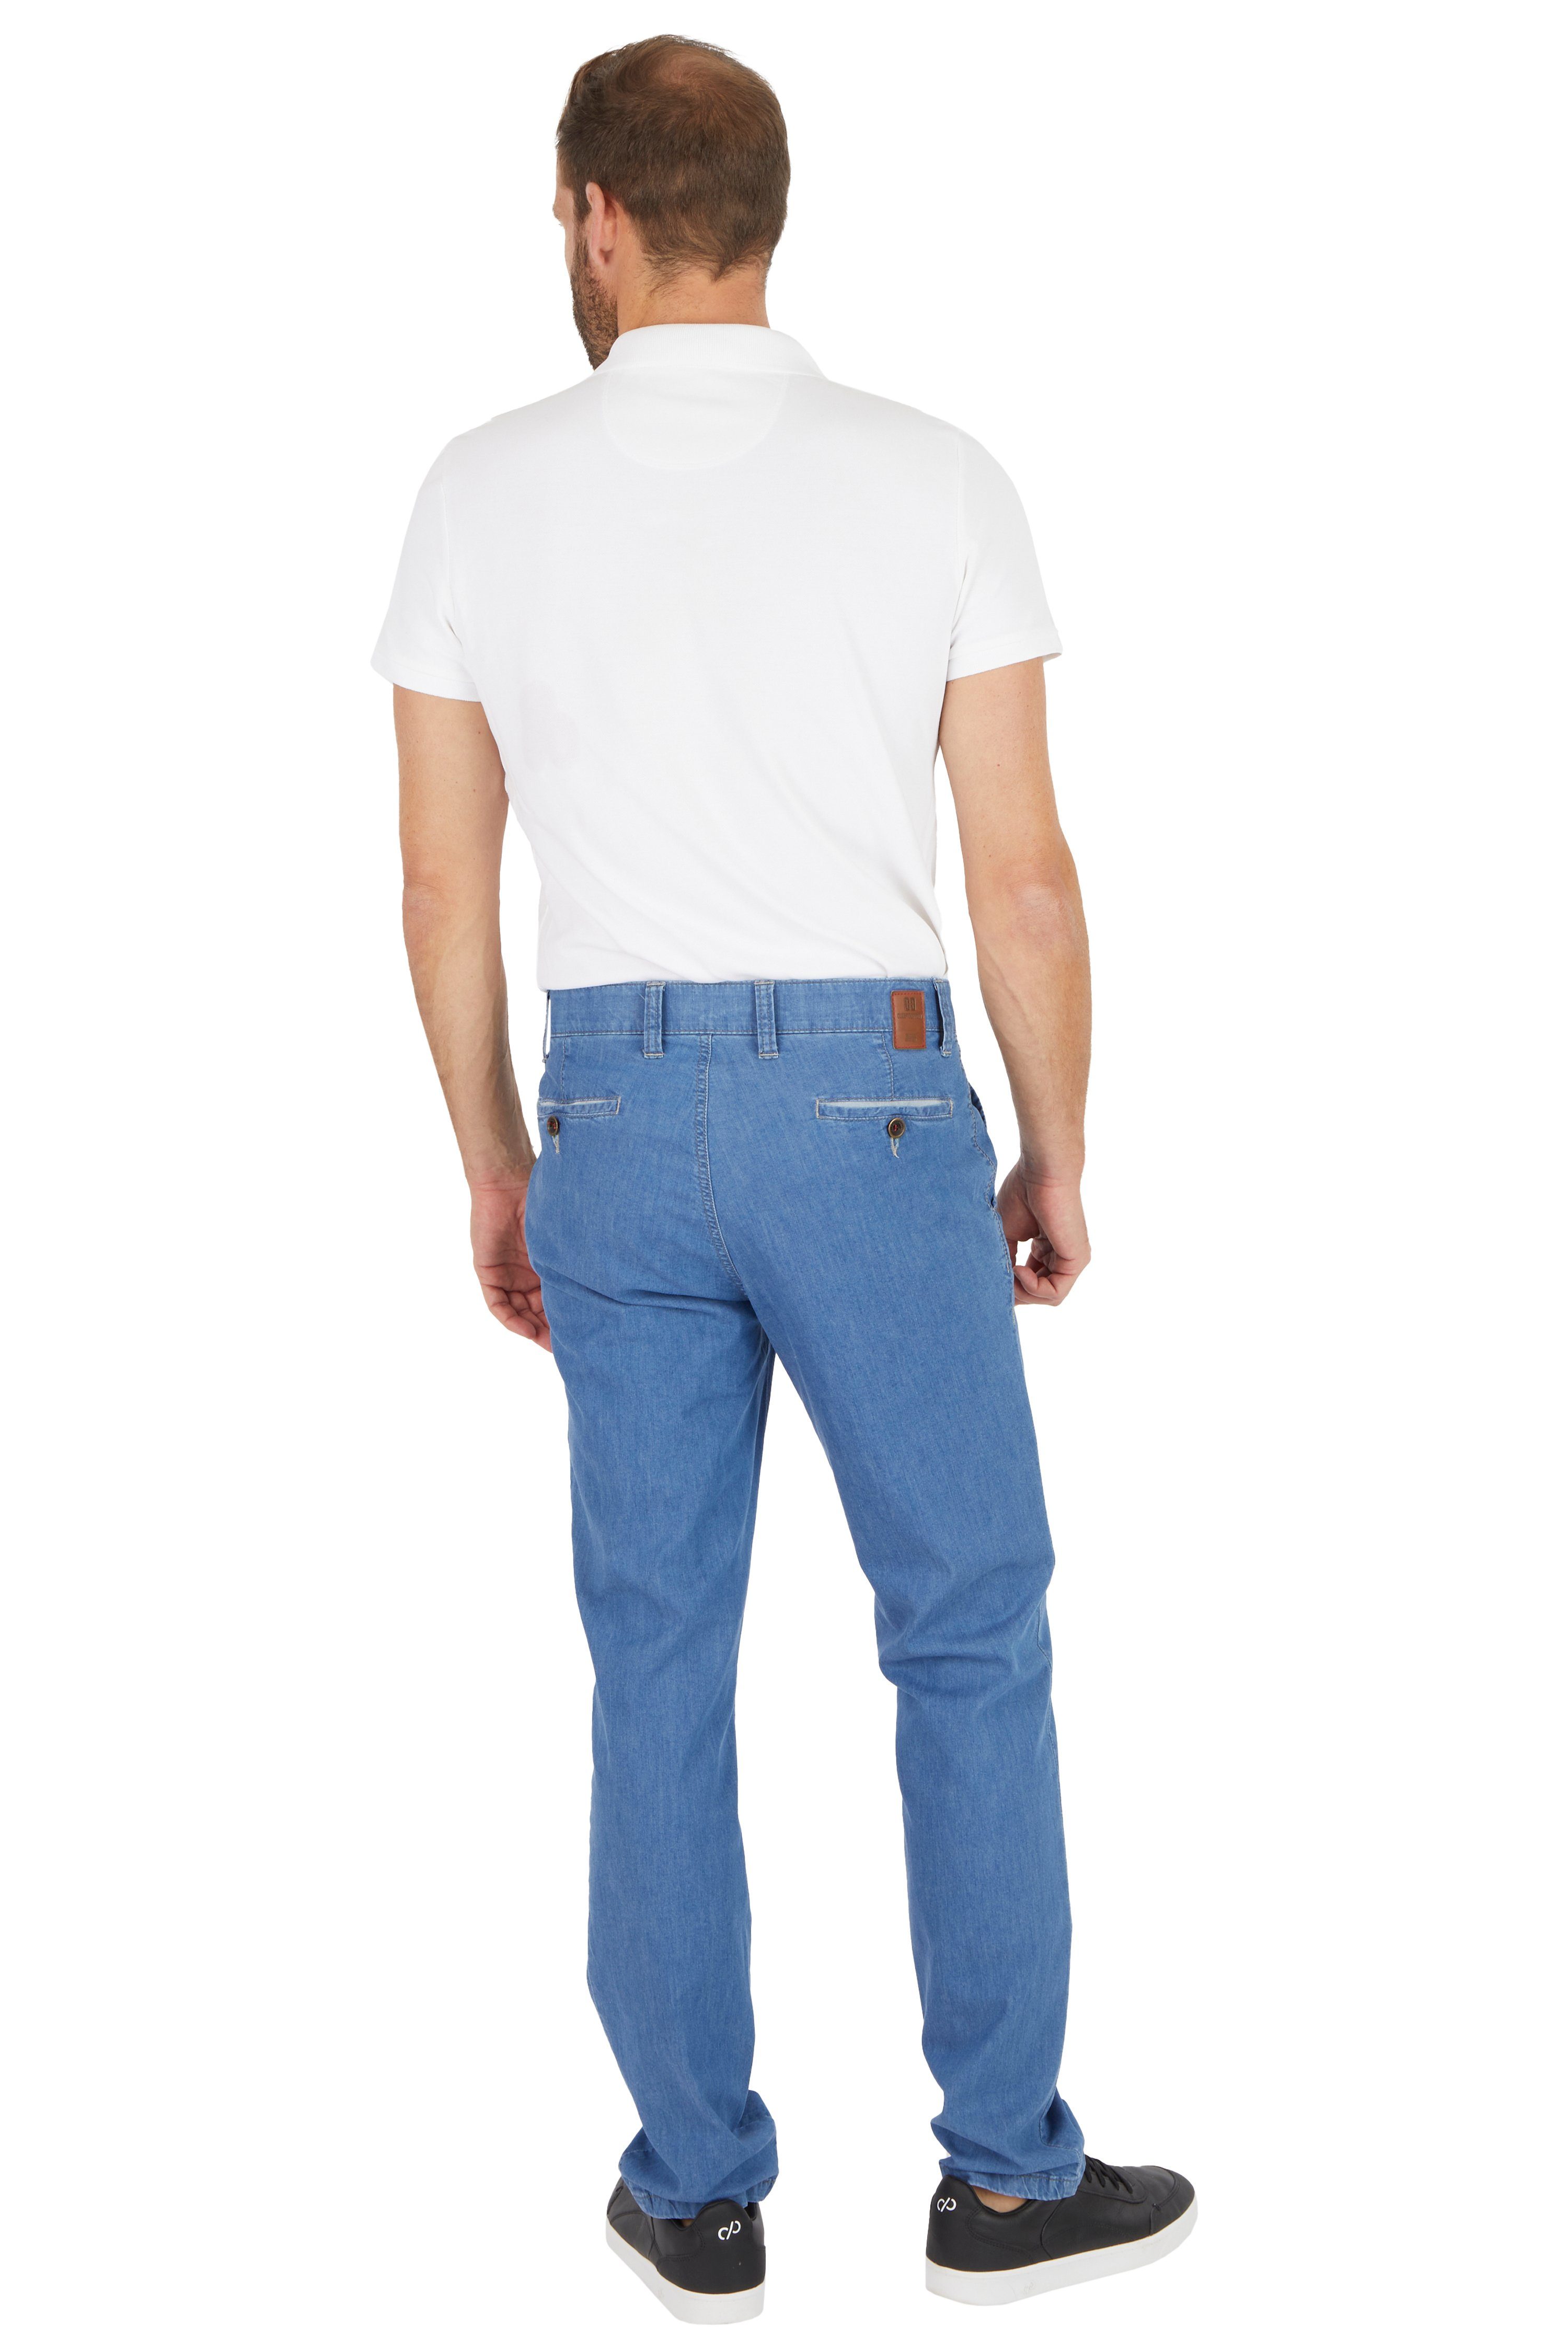 Club of Bequeme Jeans Comfort